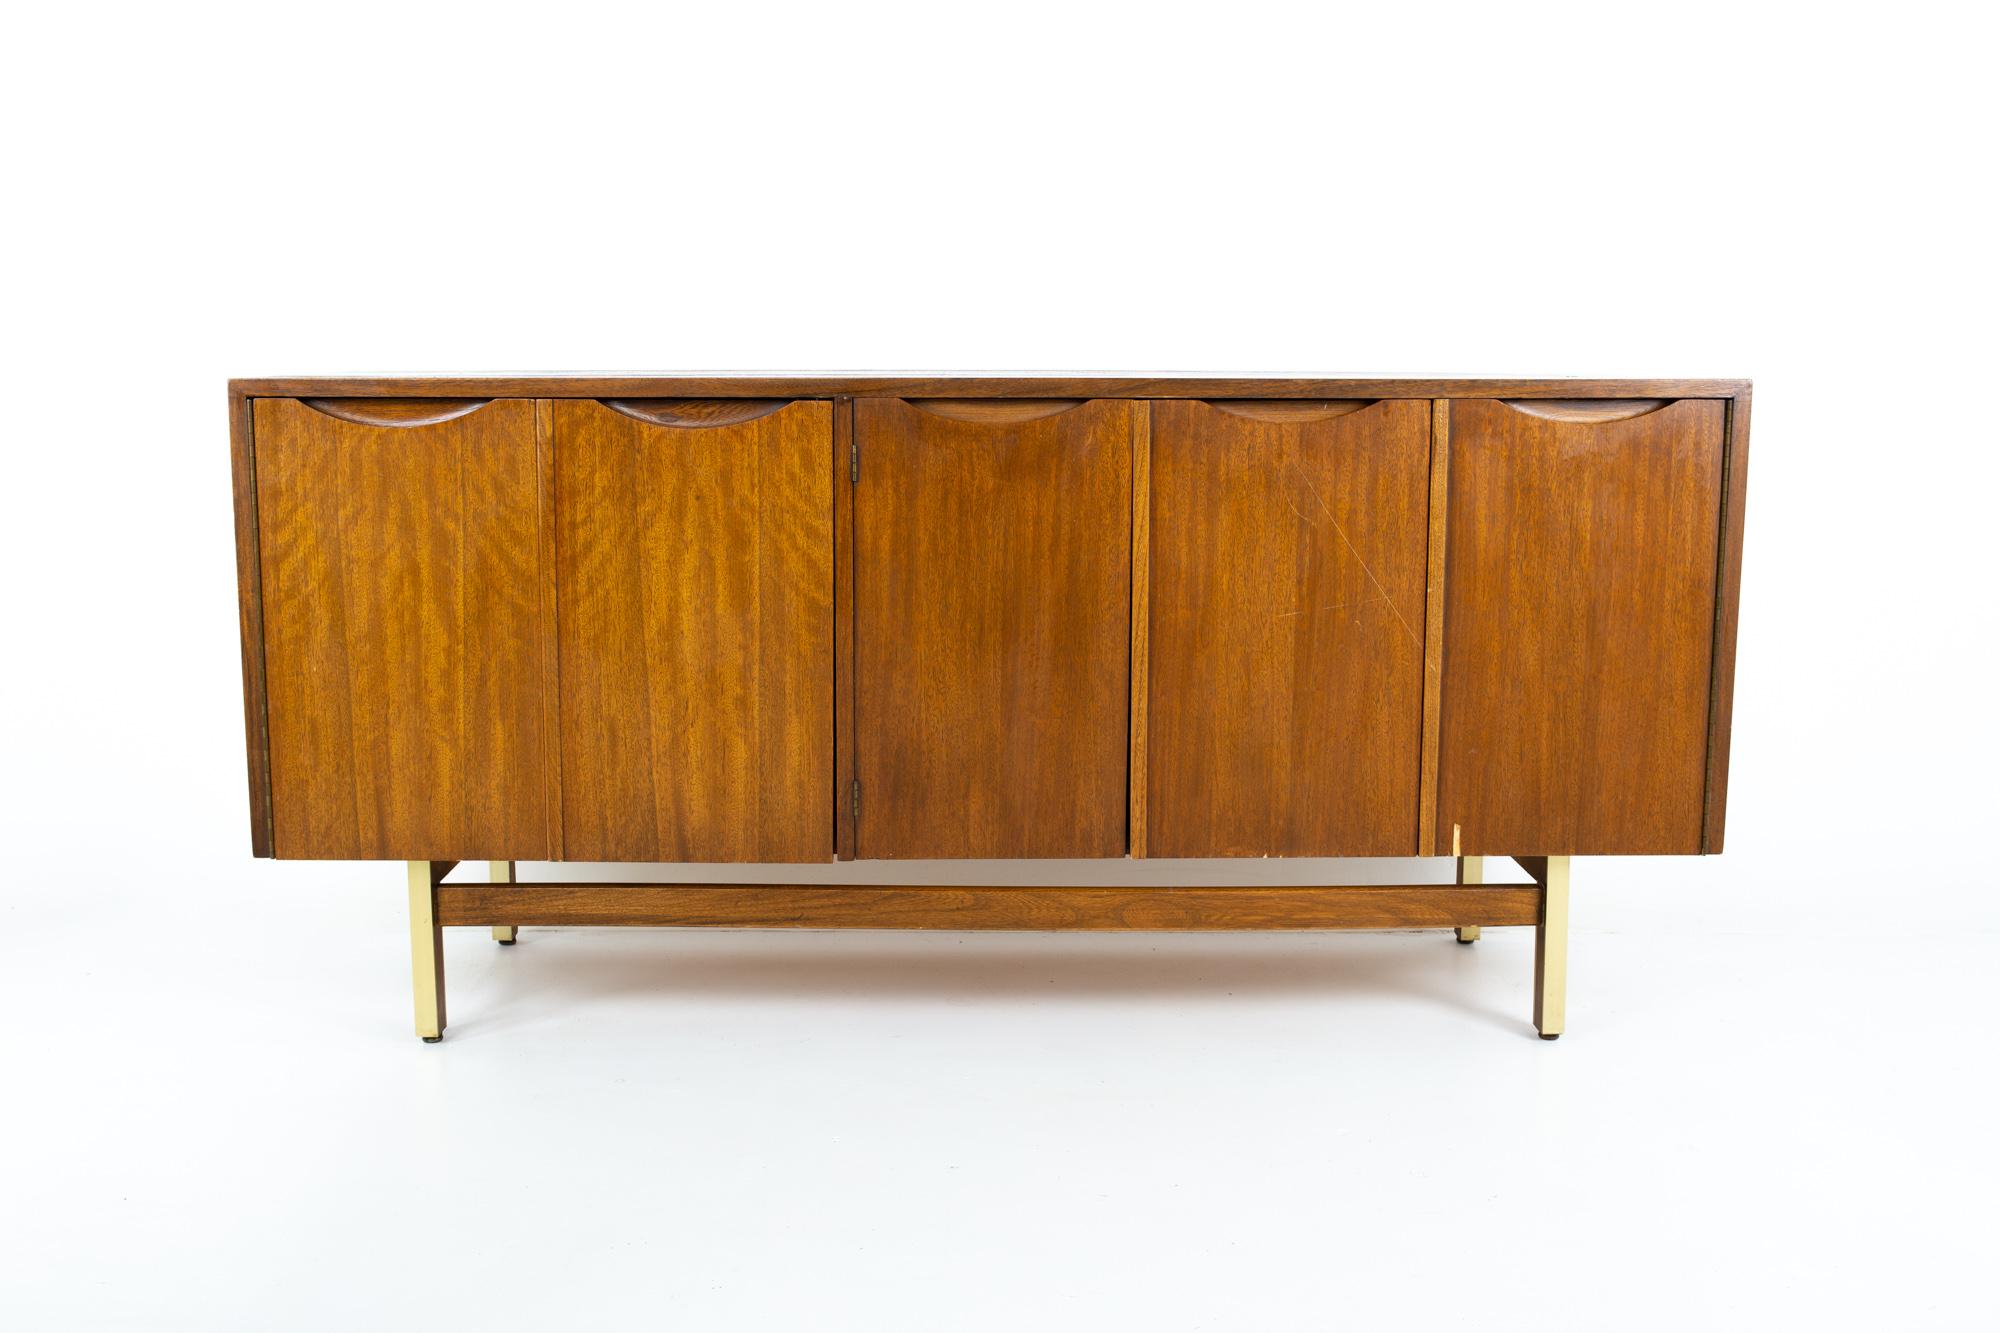 American of Martinsville Mid Century walnut and brass accordion door credenza
Credenza measures: 64 wide x 18.5 deep x 30 inches high

This price includes getting this piece in what we call restored vintage condition. That means the piece is